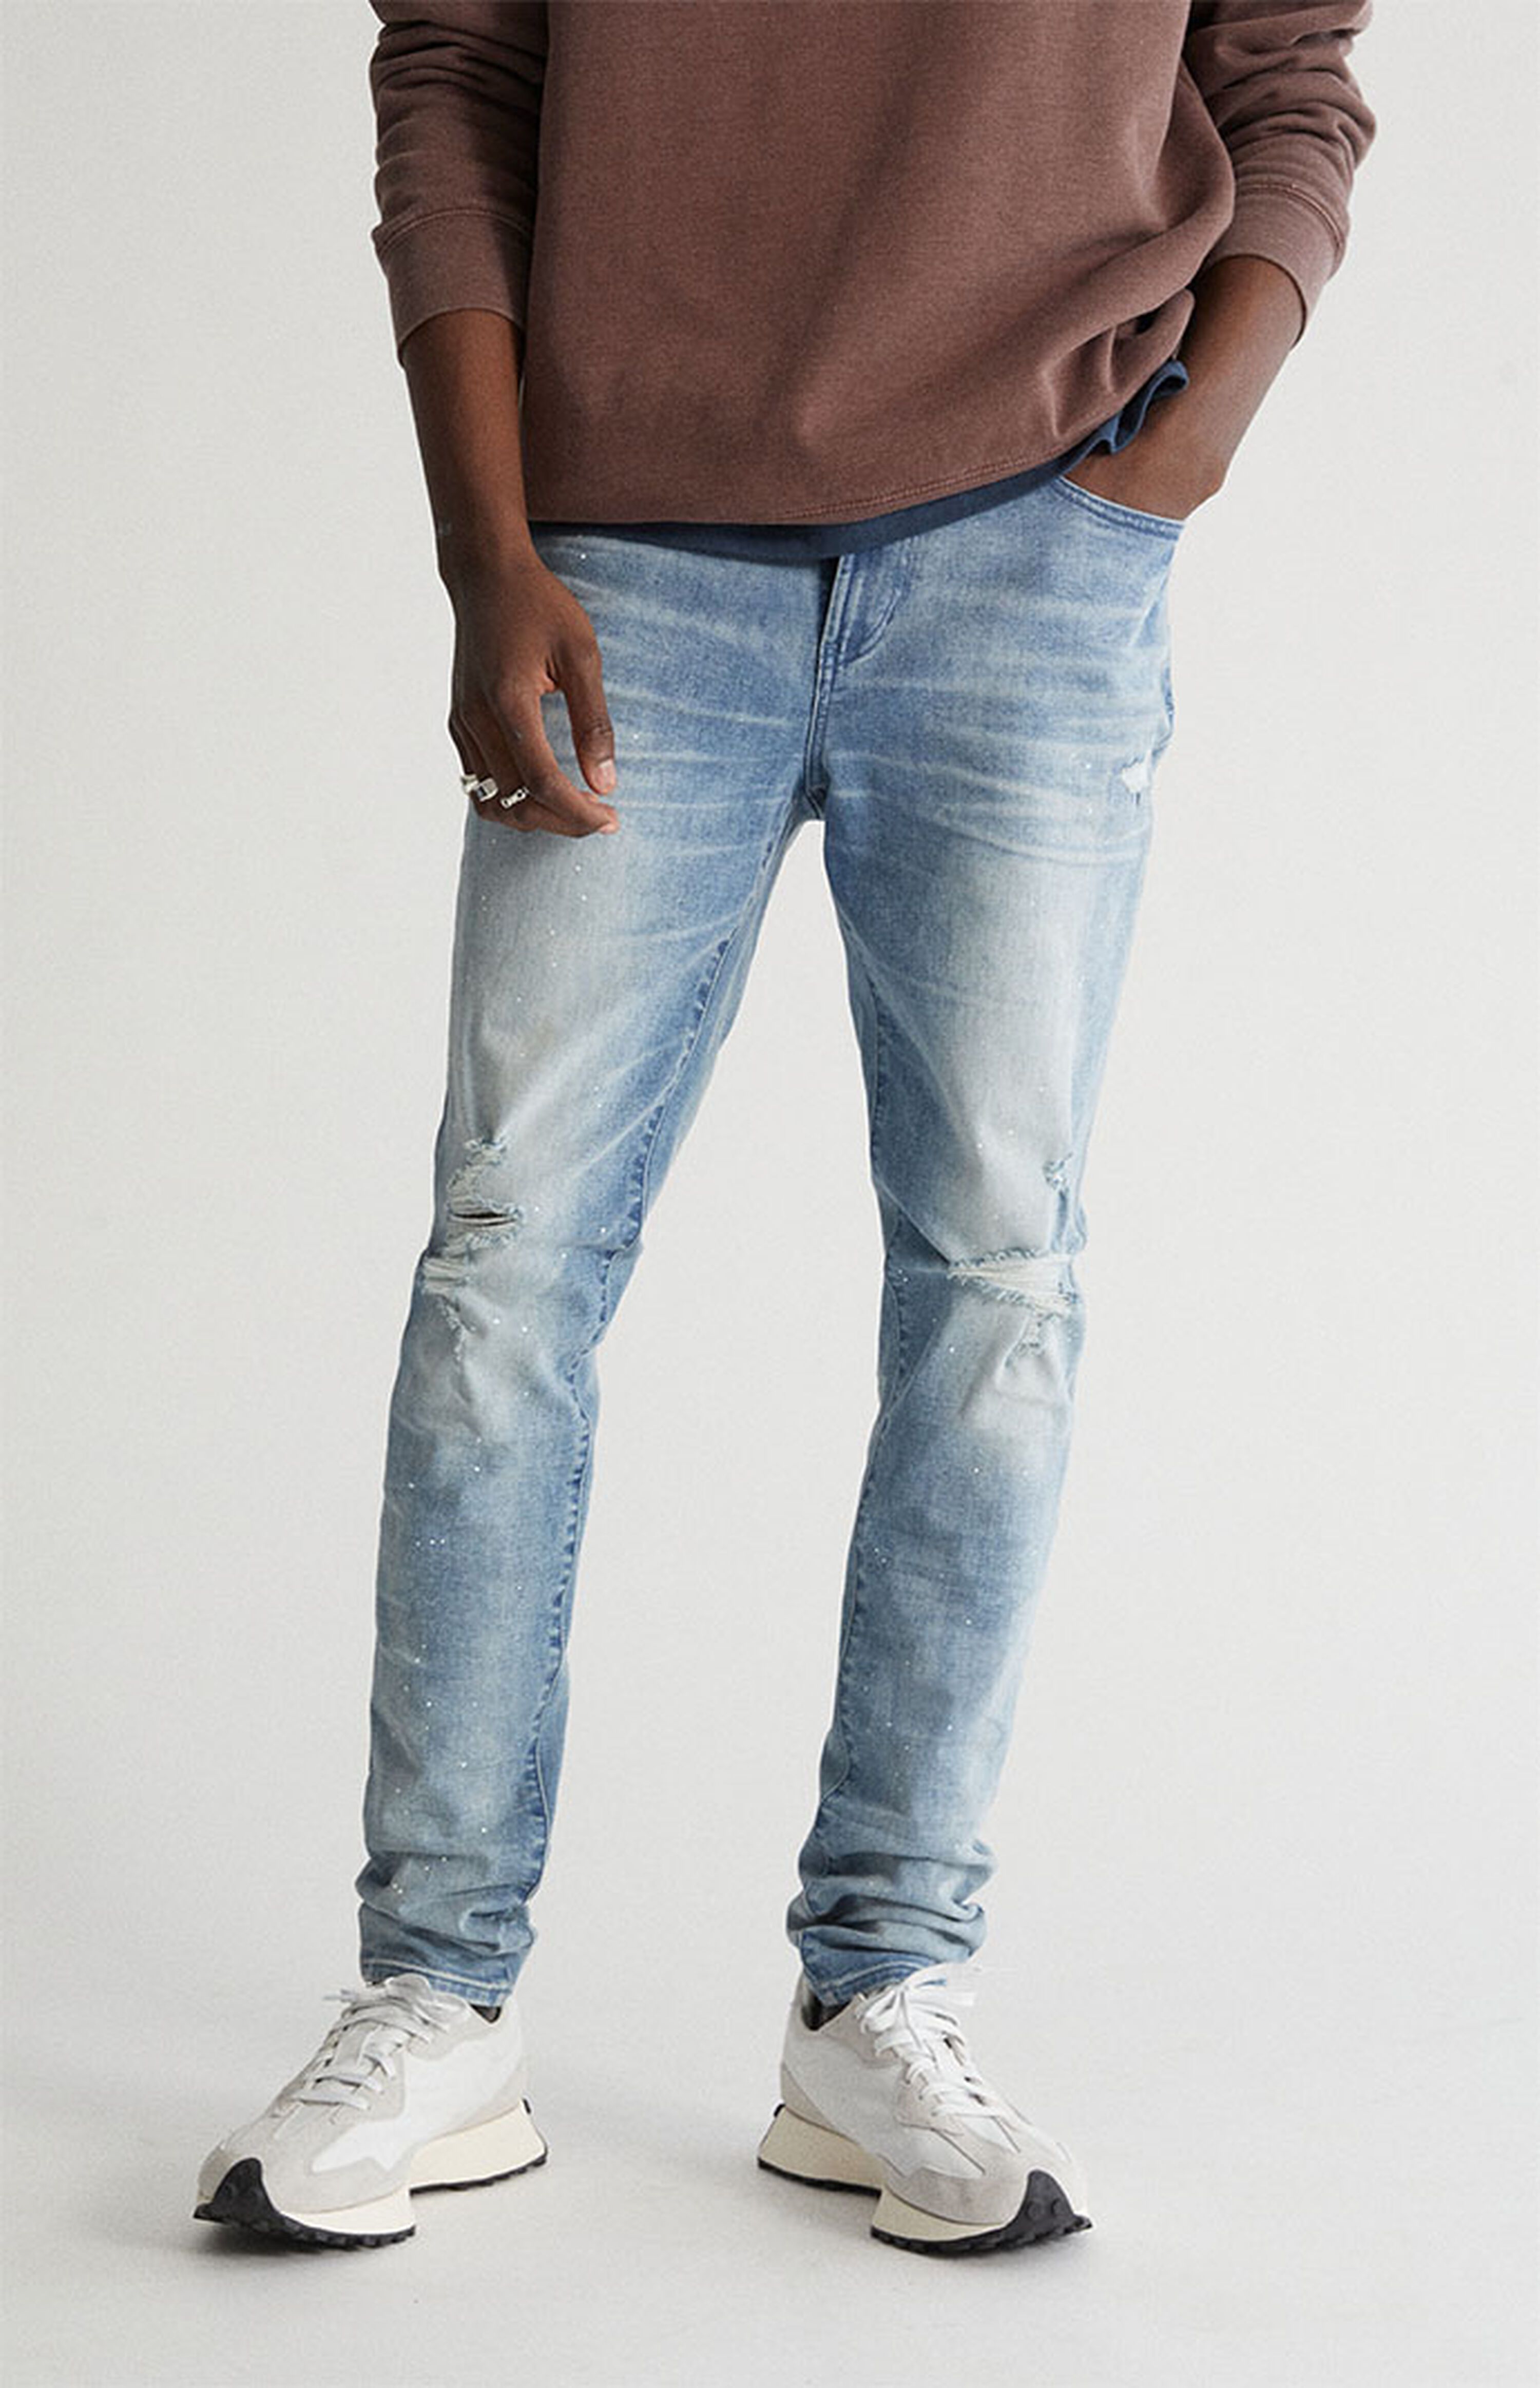 PacSun Light Ripped Stacked Skinny Jeans | PacSun | PacSun